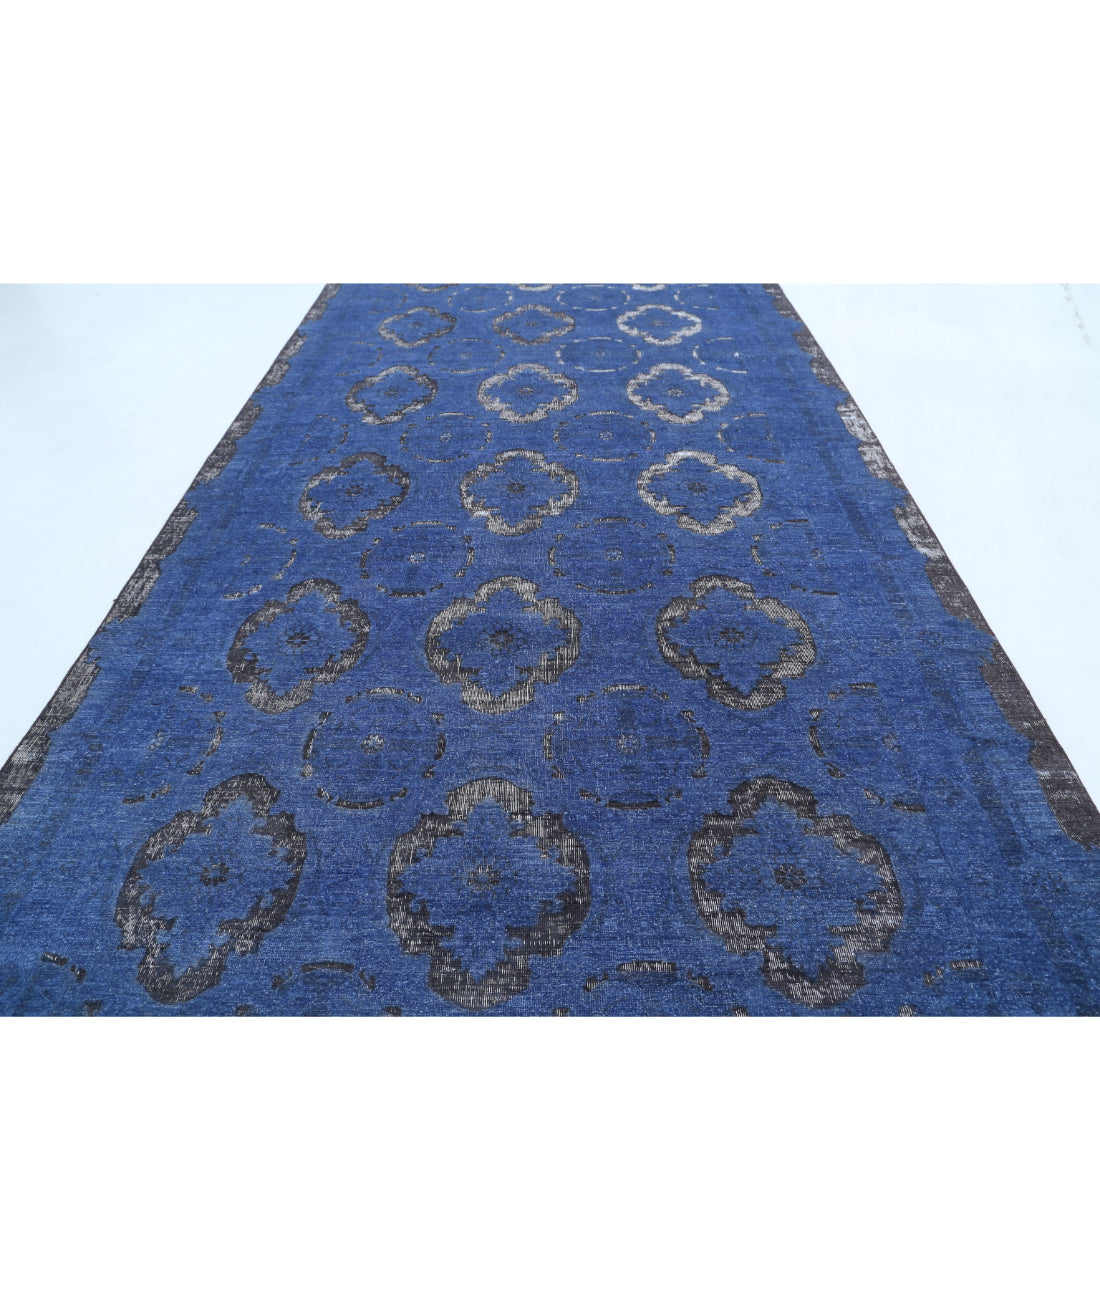 Hand Knotted Onyx Wool Rug - 6'3'' x 20'4'' 6'3'' x 20'4'' (188 X 610) / Blue / Blue